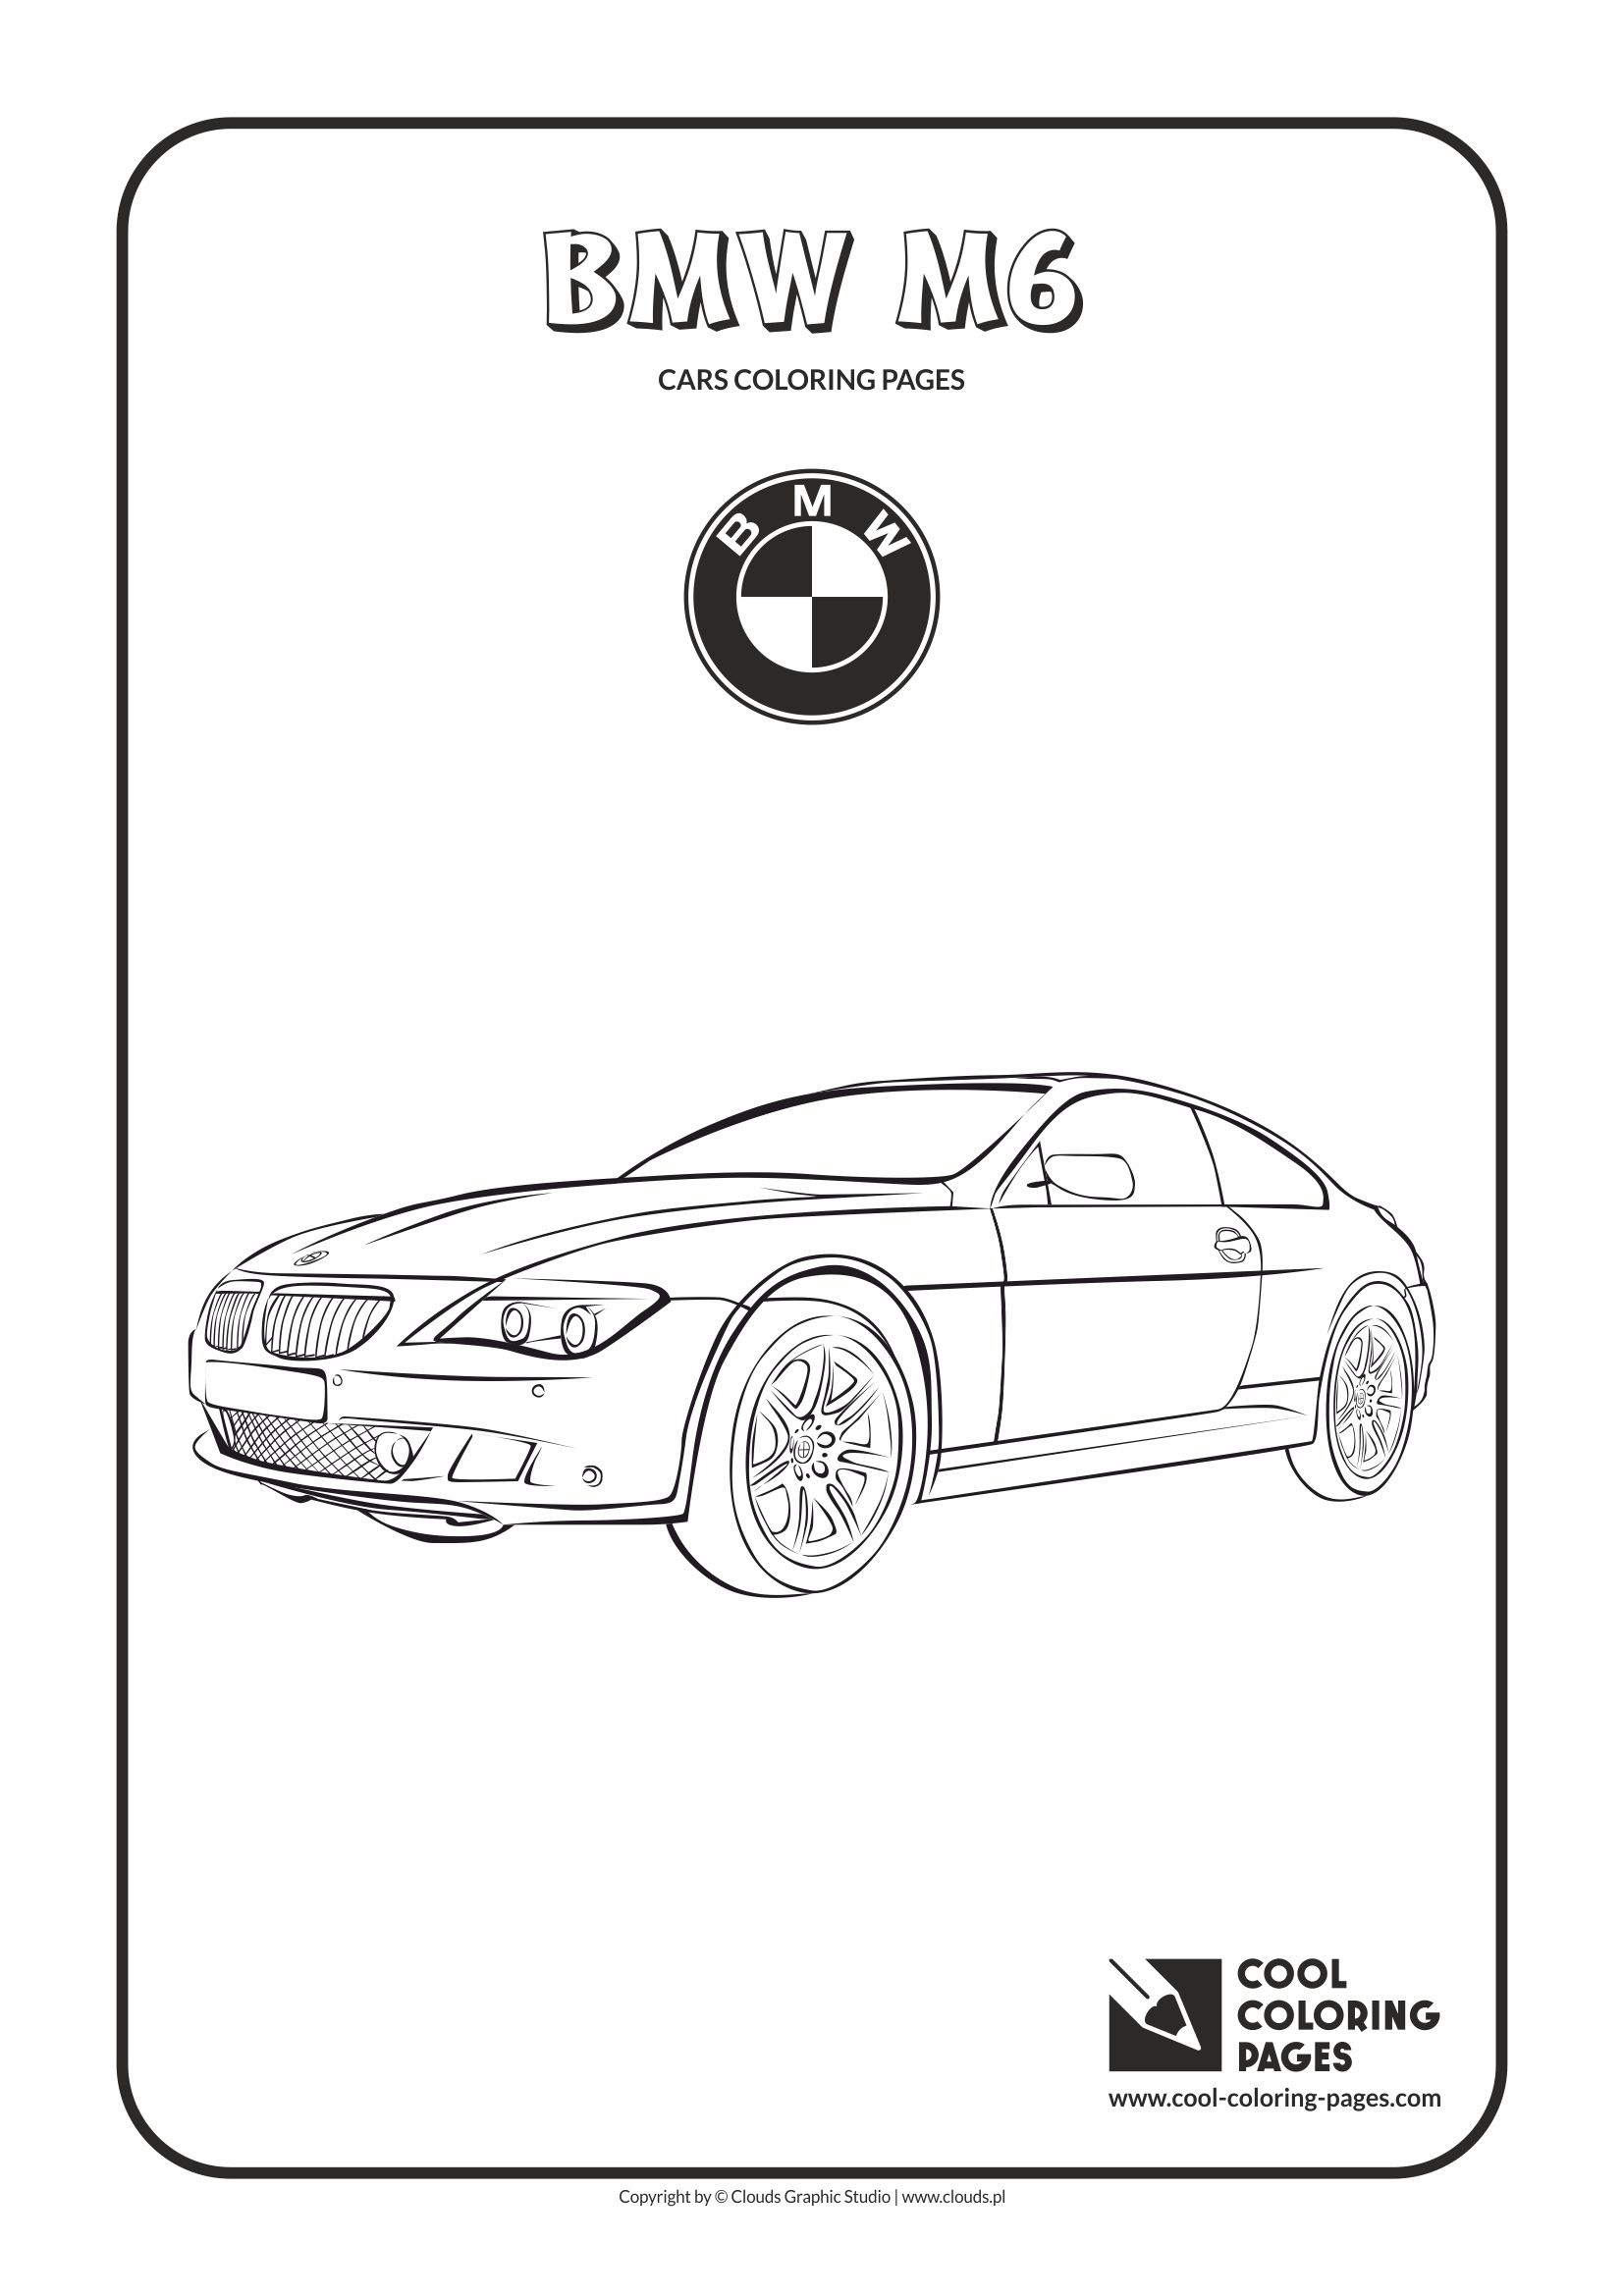 Download Cool Coloring Pages Vehicles coloring pages - Cool Coloring Pages | Free educational coloring ...